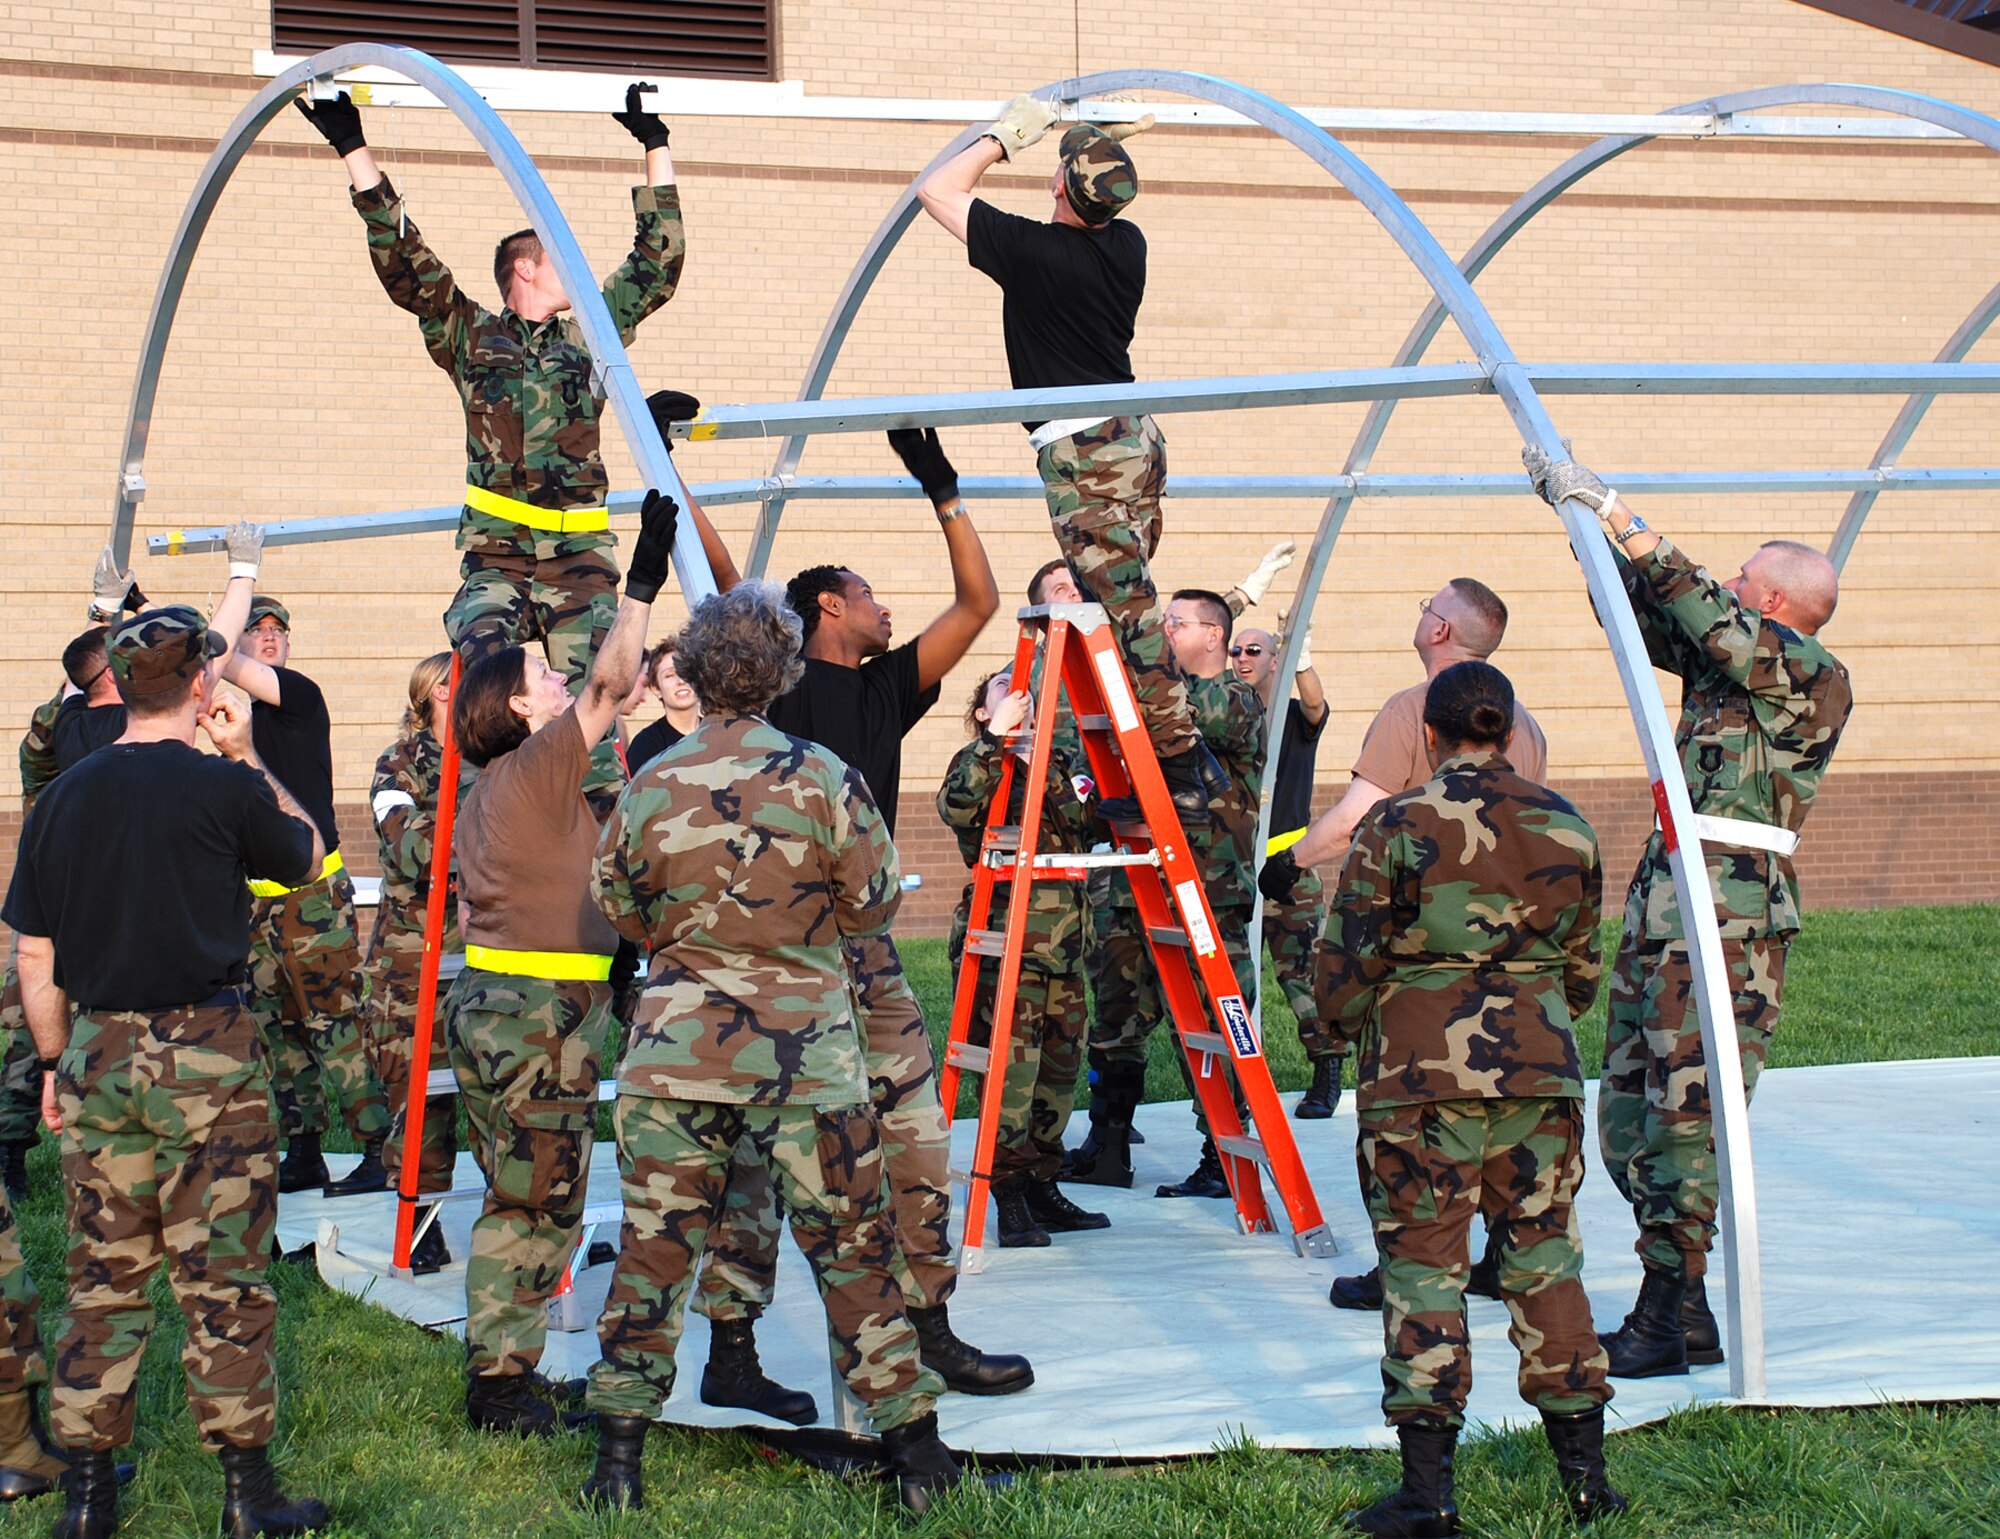 The Medical Group works together to build portable structure called an Alaskan shelter during Medical Unit Readiness Training at the clinic May 18. An Alaskan structure serves as a hospital in a deployed environment. (Photo by Airman 1st Class Jessica Lockoski)